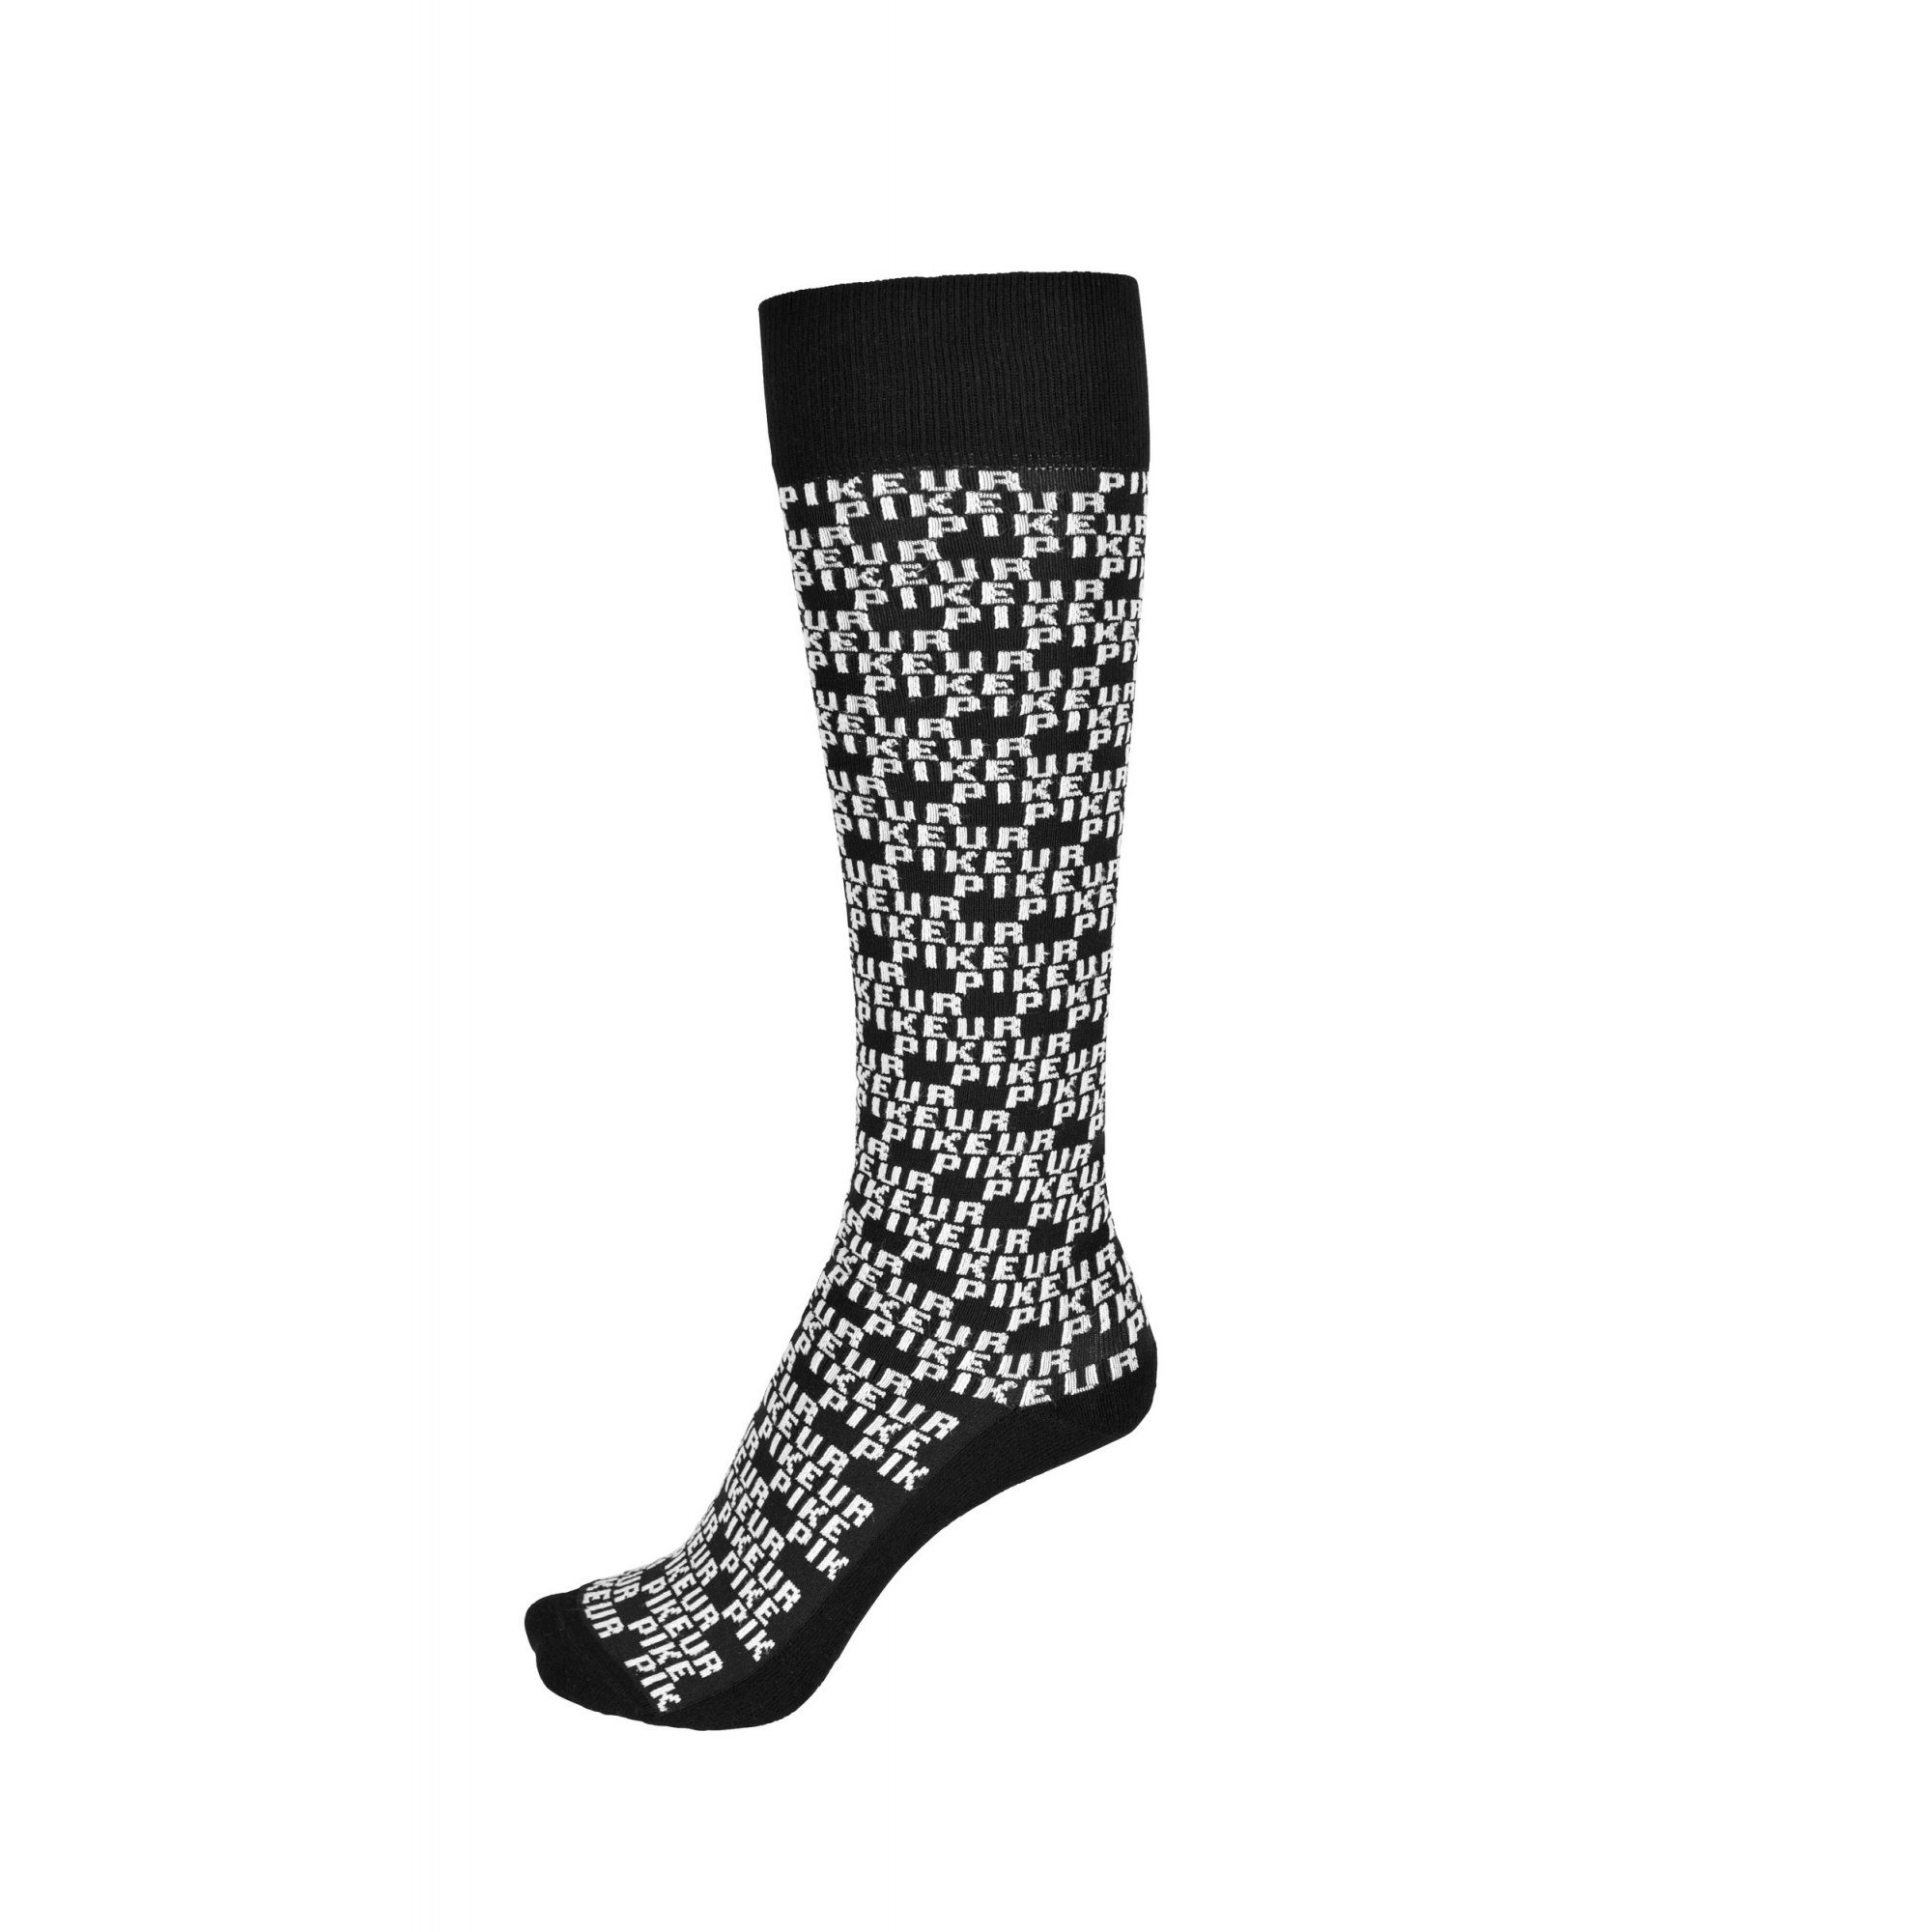 PIKEUR LOGO ALL OVER WOMEN'S HORSE RIDING KNEE SOCKS - EQUISHOP ...